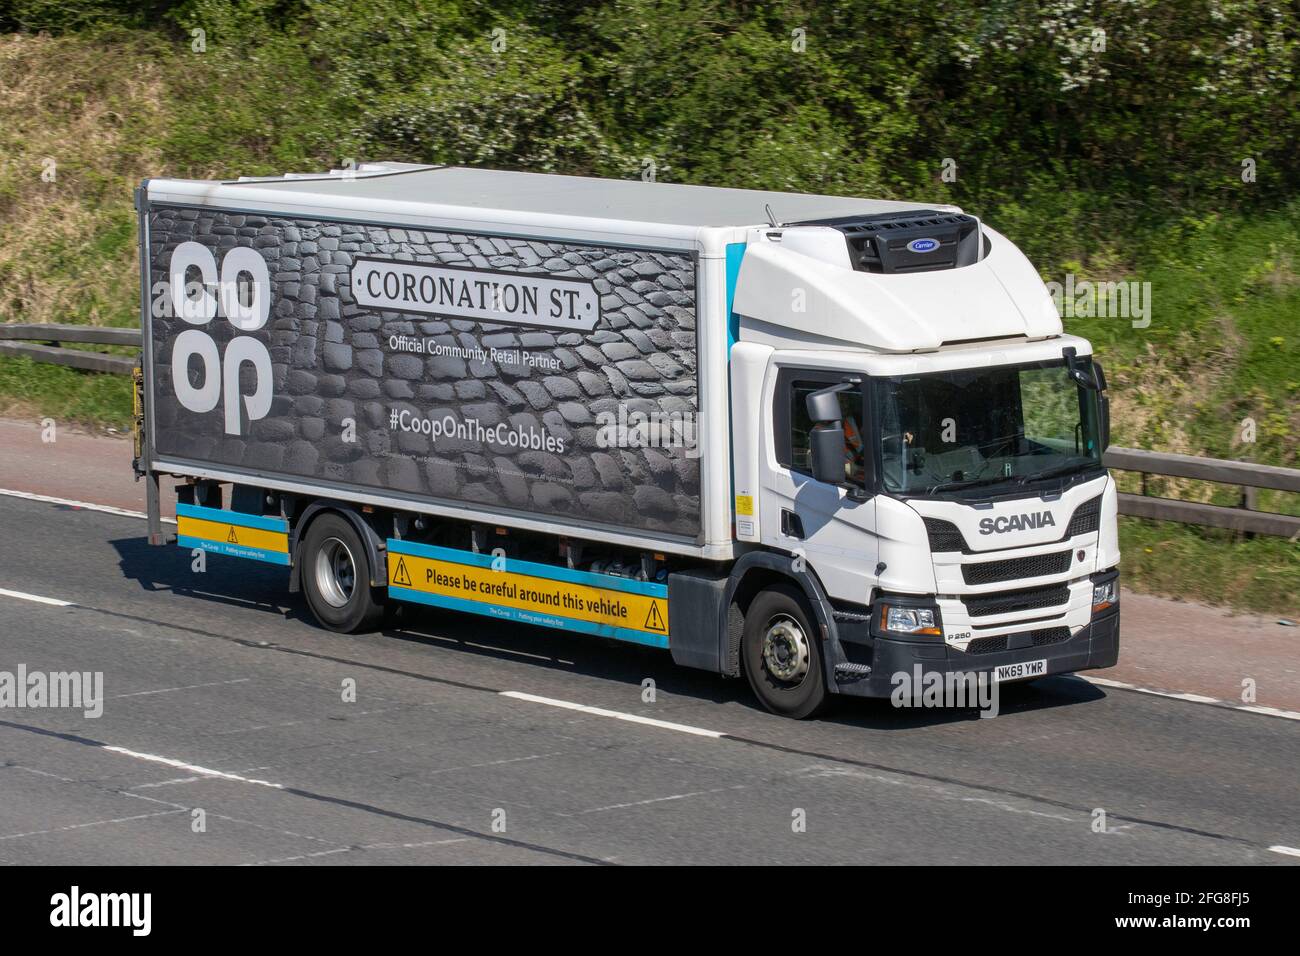 Co-op specially branded delivery trucks; Coop lorry, heavy-duty vehicles, transportation, food groceries truck, Coronation Street cargo carrier, Scania vehicle, European commercial transport industry HGV, M6 at Manchester, UK Stock Photo